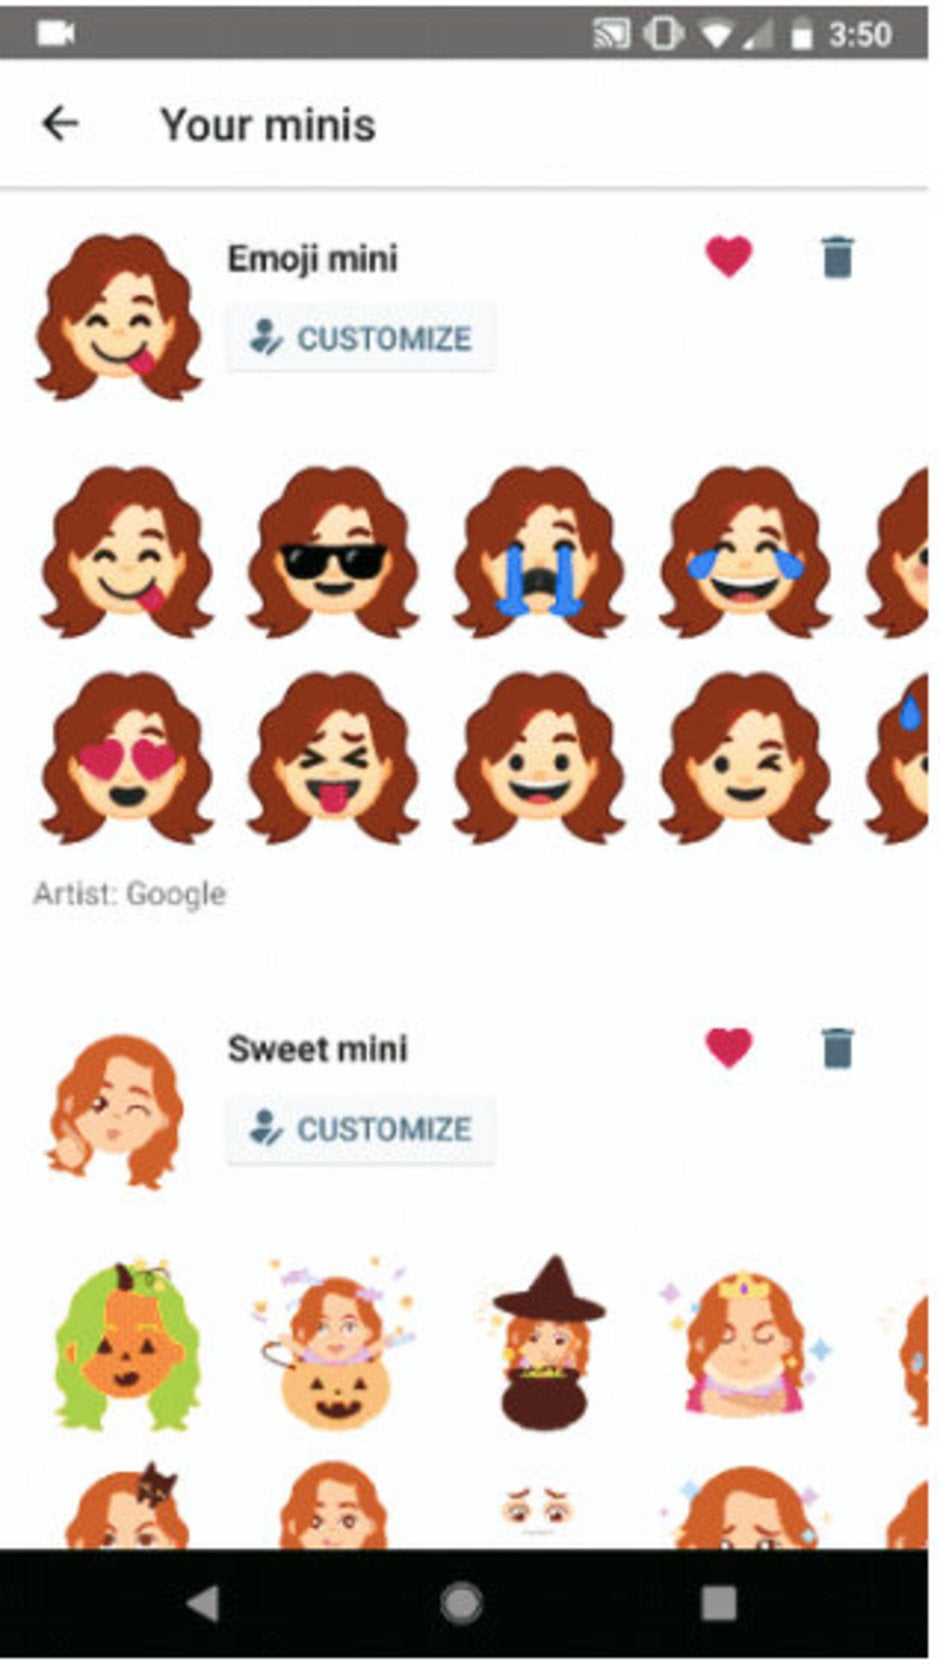 Gboard gets a new set of emoji style Mini stickers on Android and iOS